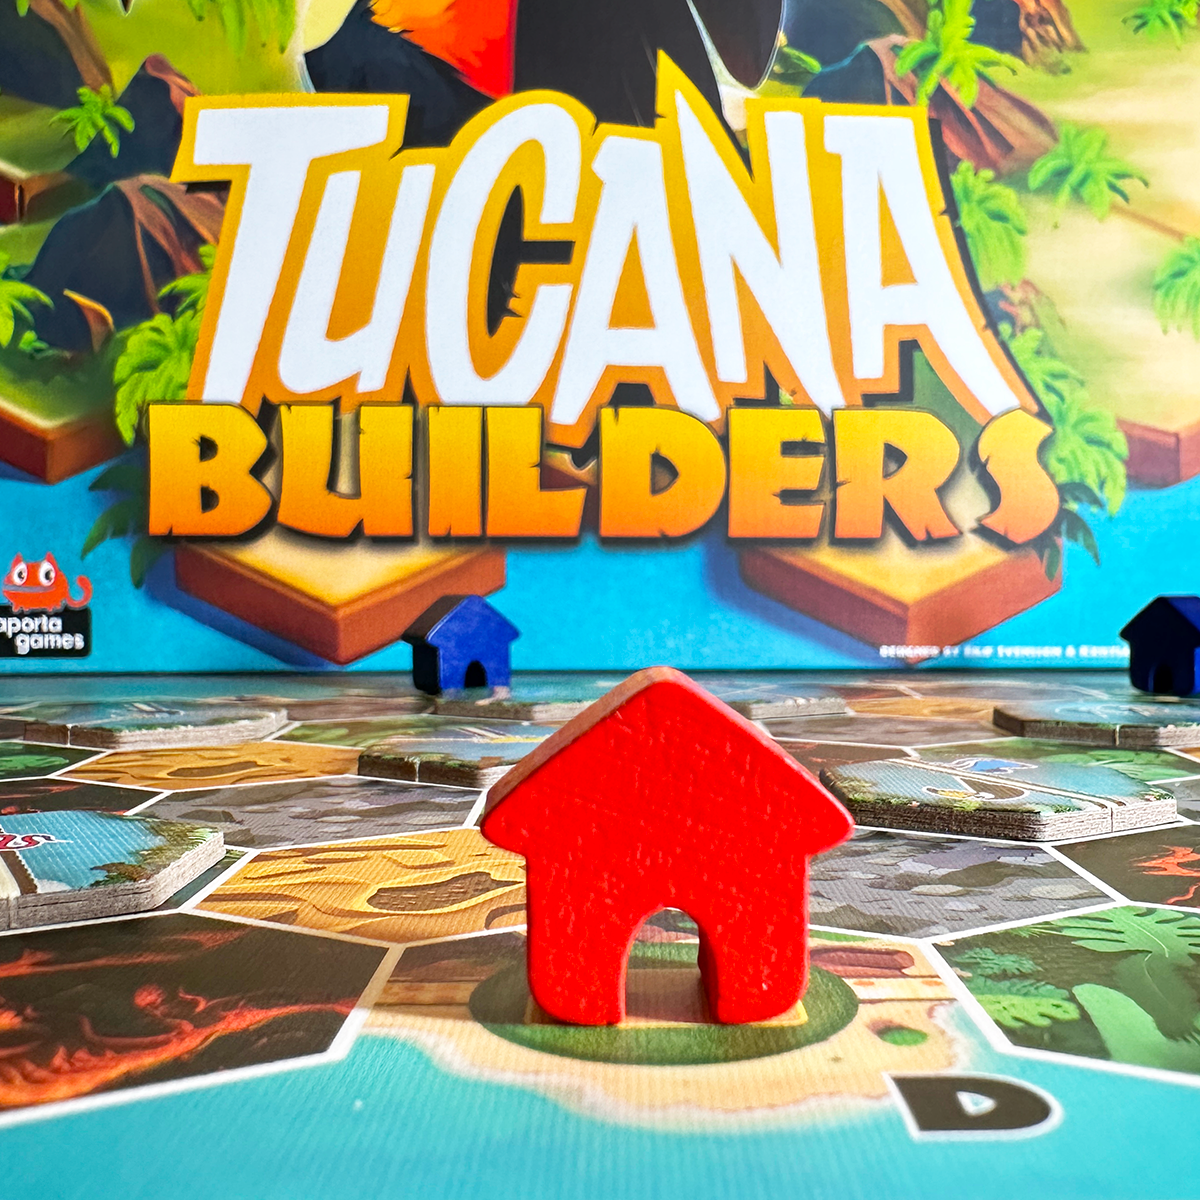 Tucana Builders Board Game Review Hut and box lid